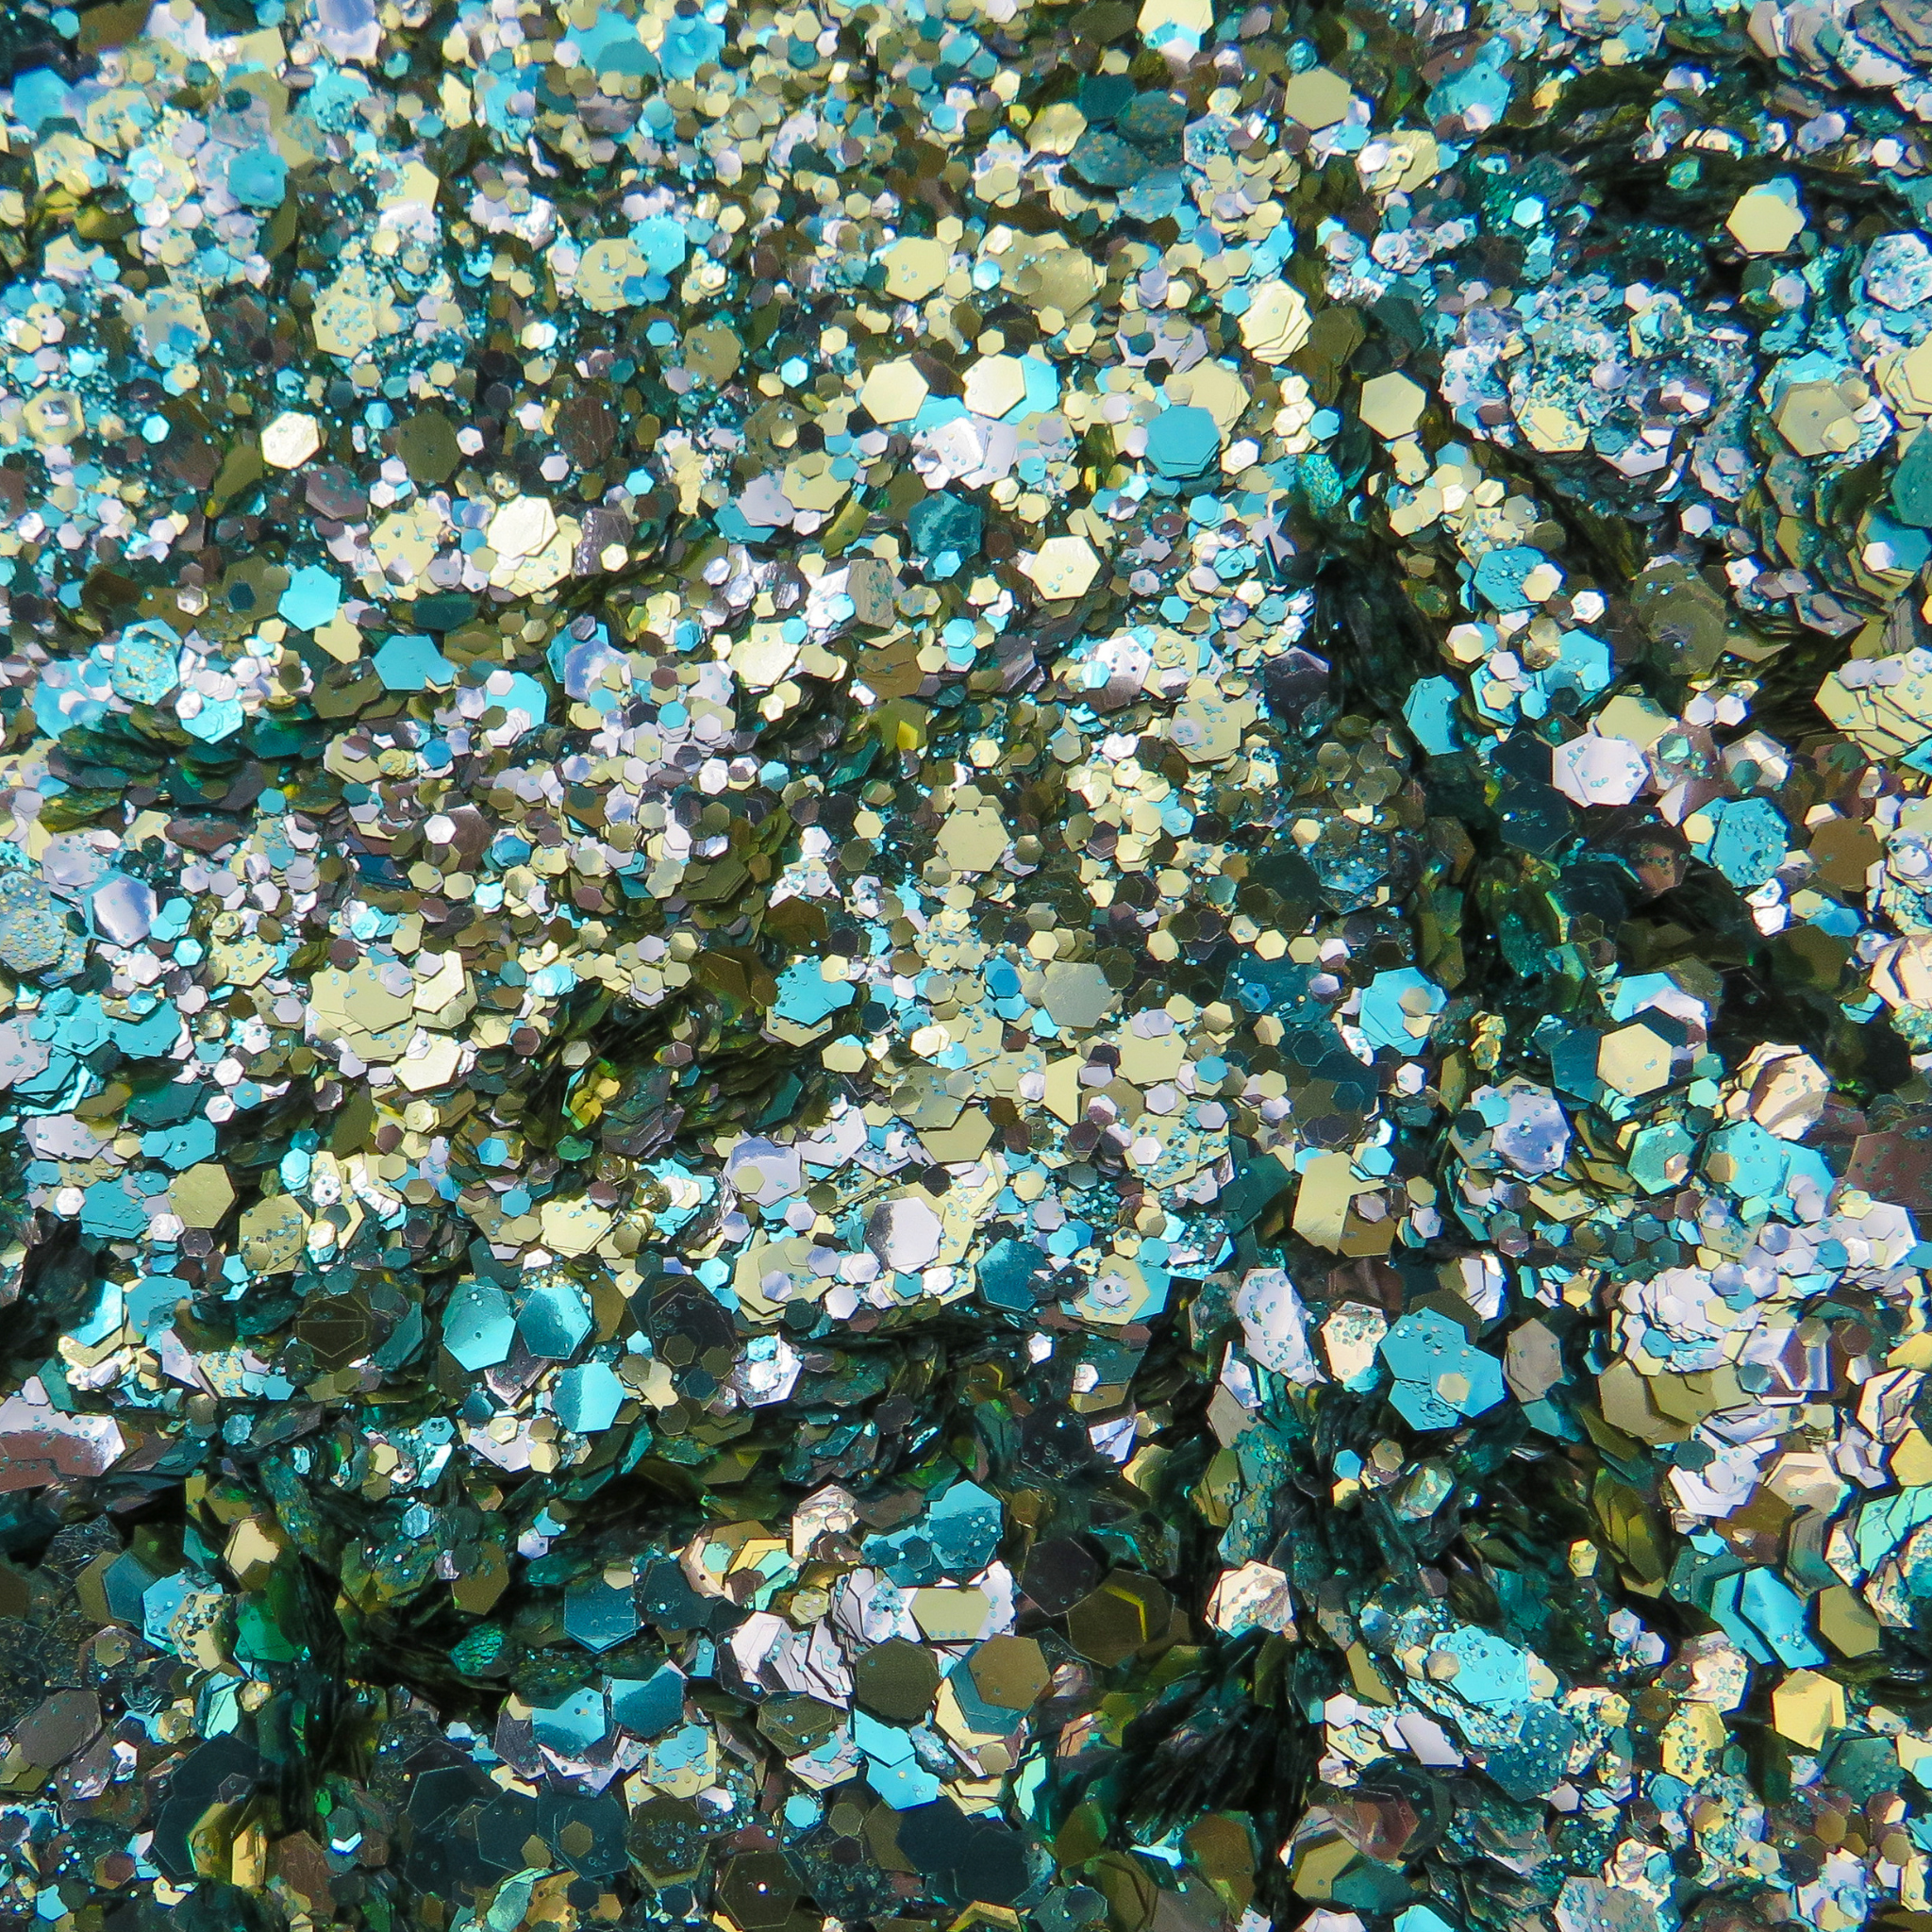 Pineapple Kisses blend of turquoise, gold and silver biodegradable glitter. A tropical and summery cosmetic glitter blend